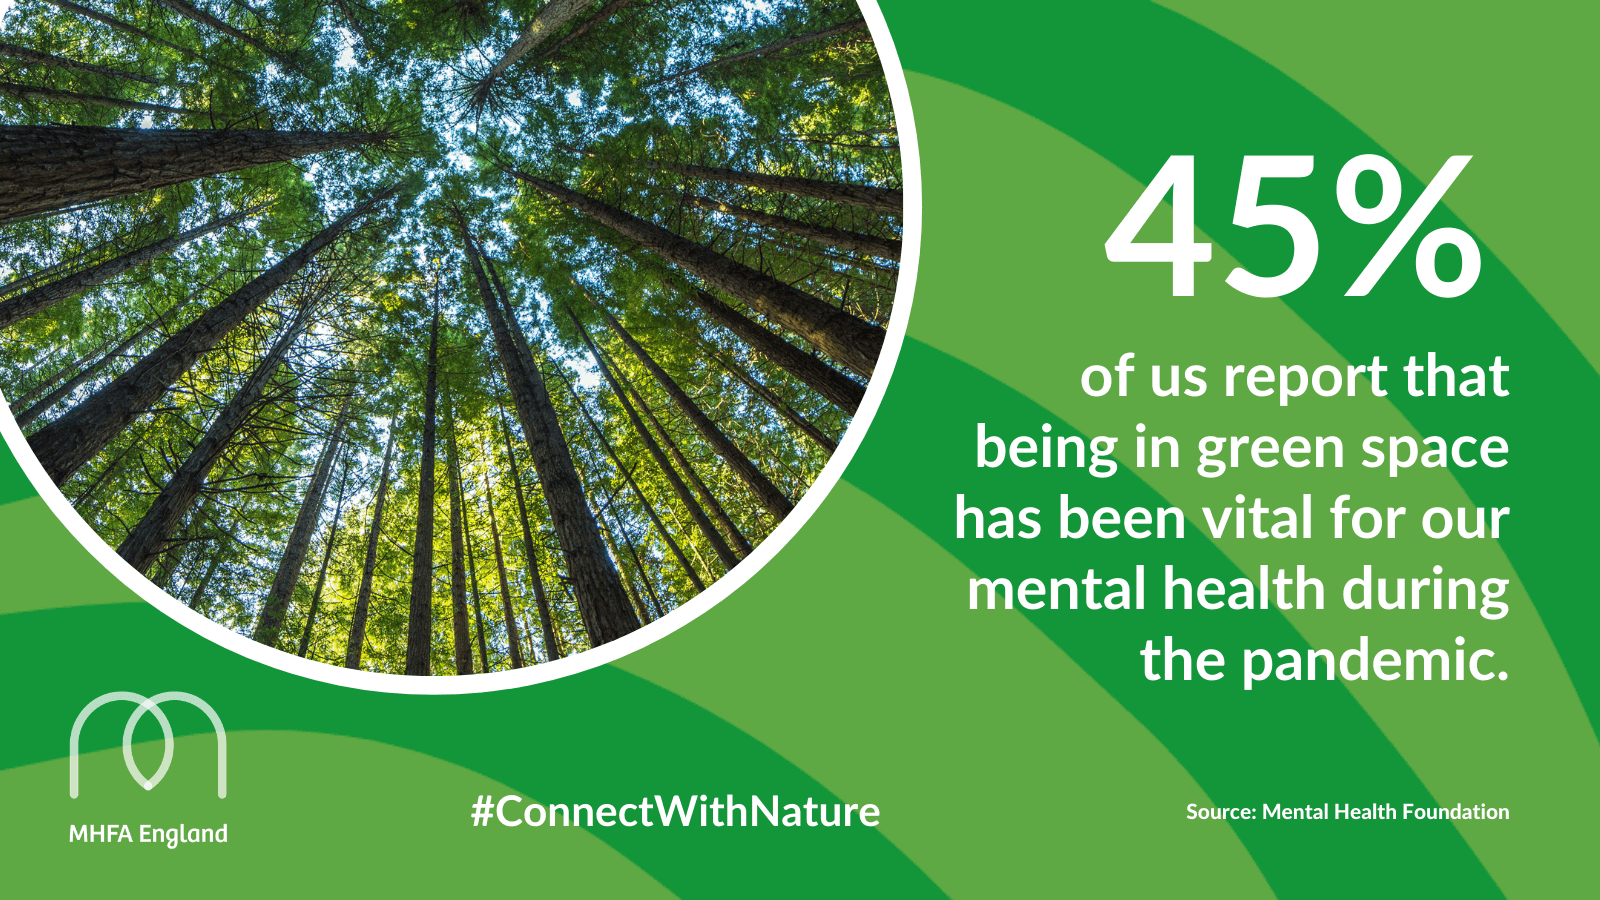 A photo of trees alongside the statistic: 45% of us report that being in green space has been vital for our mental health during the pandemic. Source: Mental Health Foundation. 